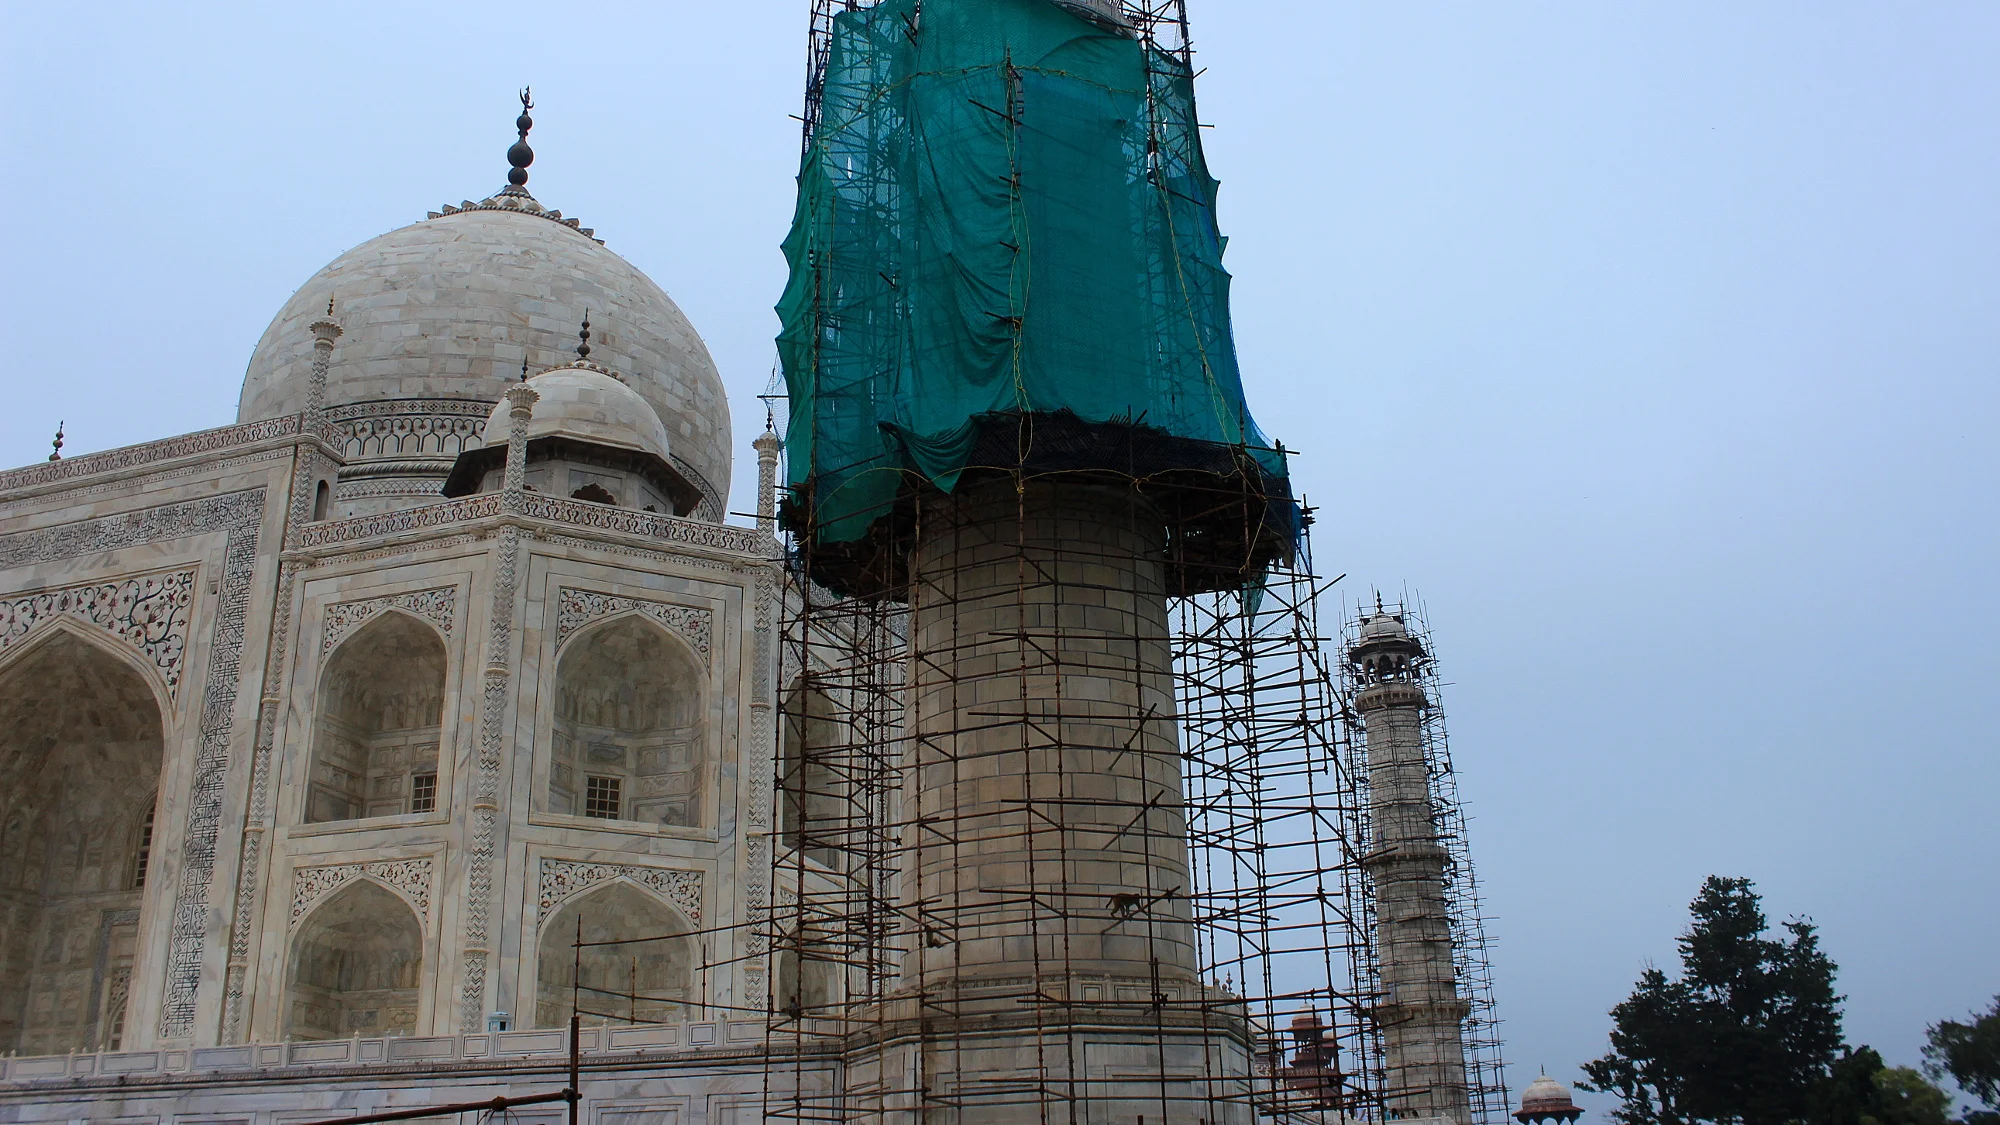 Partly covered minaret tower in front of Taj Mahal under renovation.